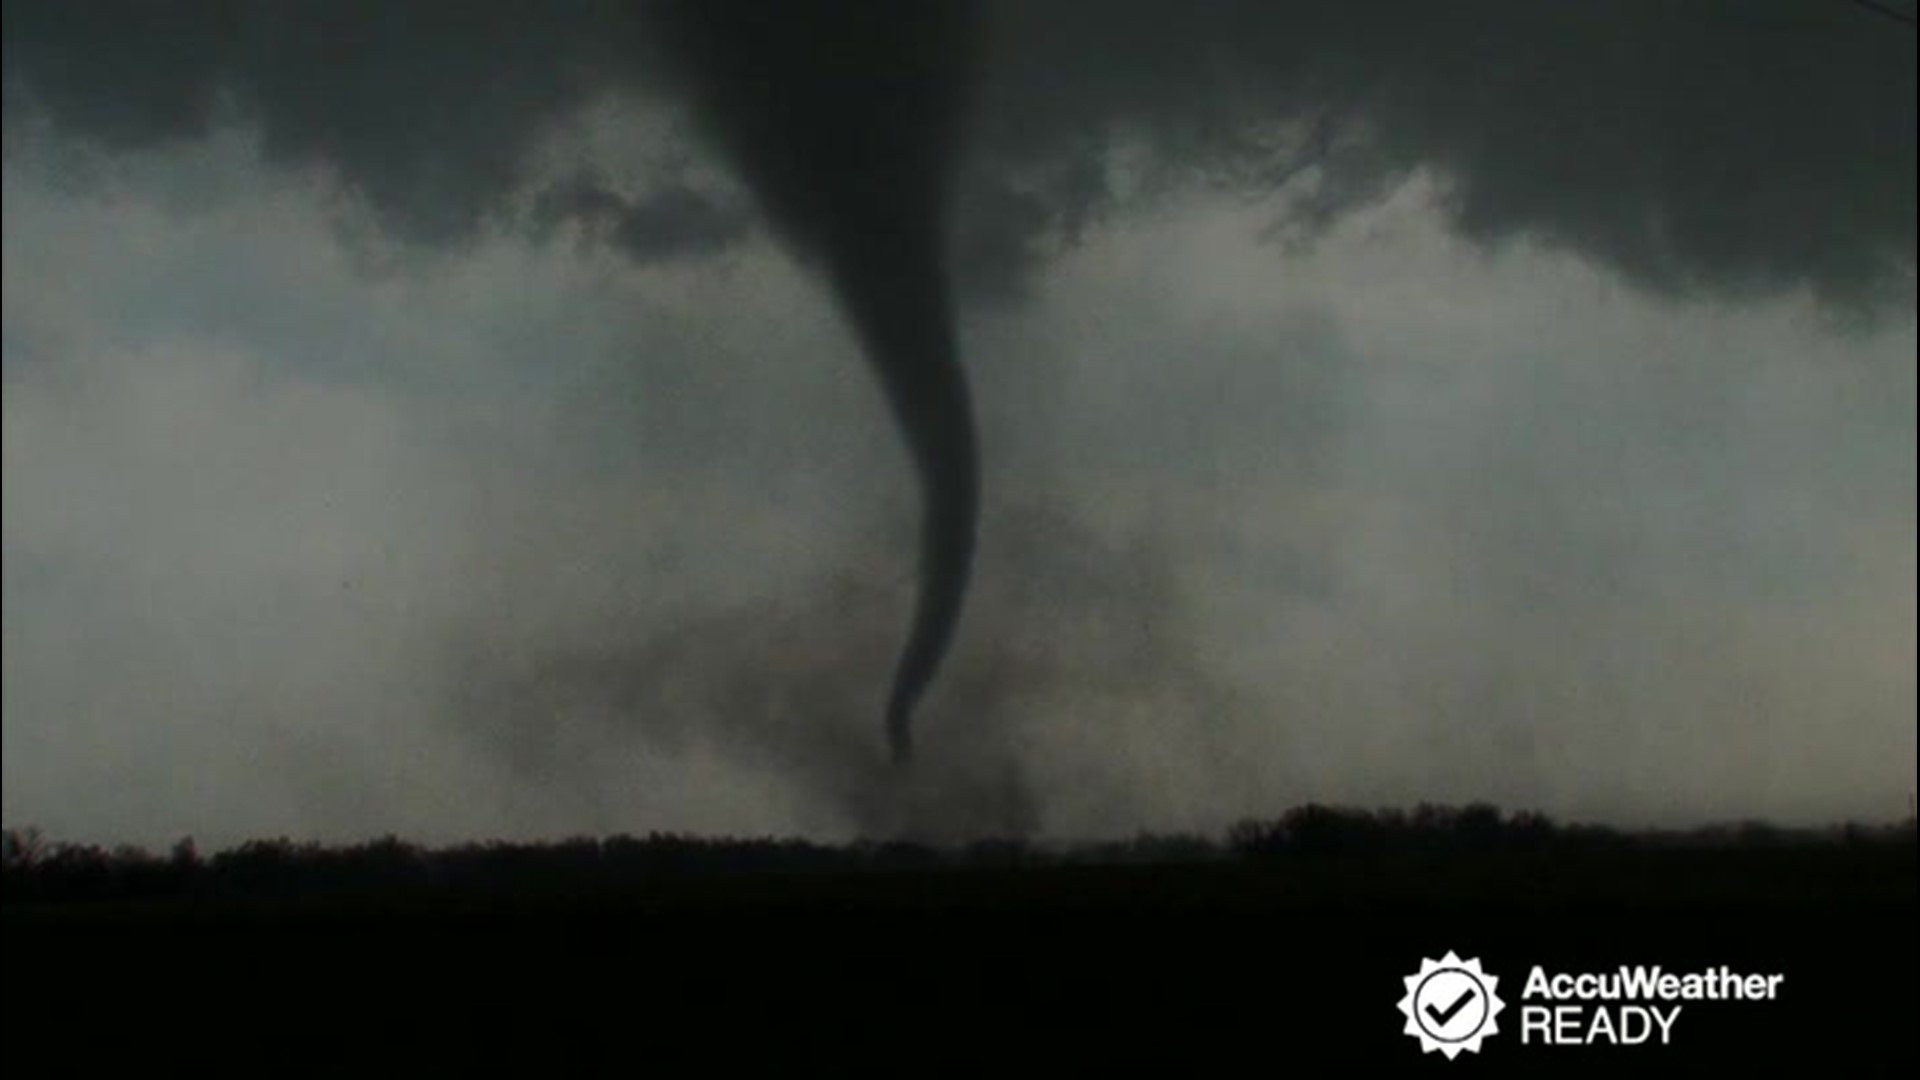 Nocturnal tornadoes, as they are called, are often among the most deadly. They strike when people are at their most vurlnerable. Here's how you can plan ahead for a nighttime tornado